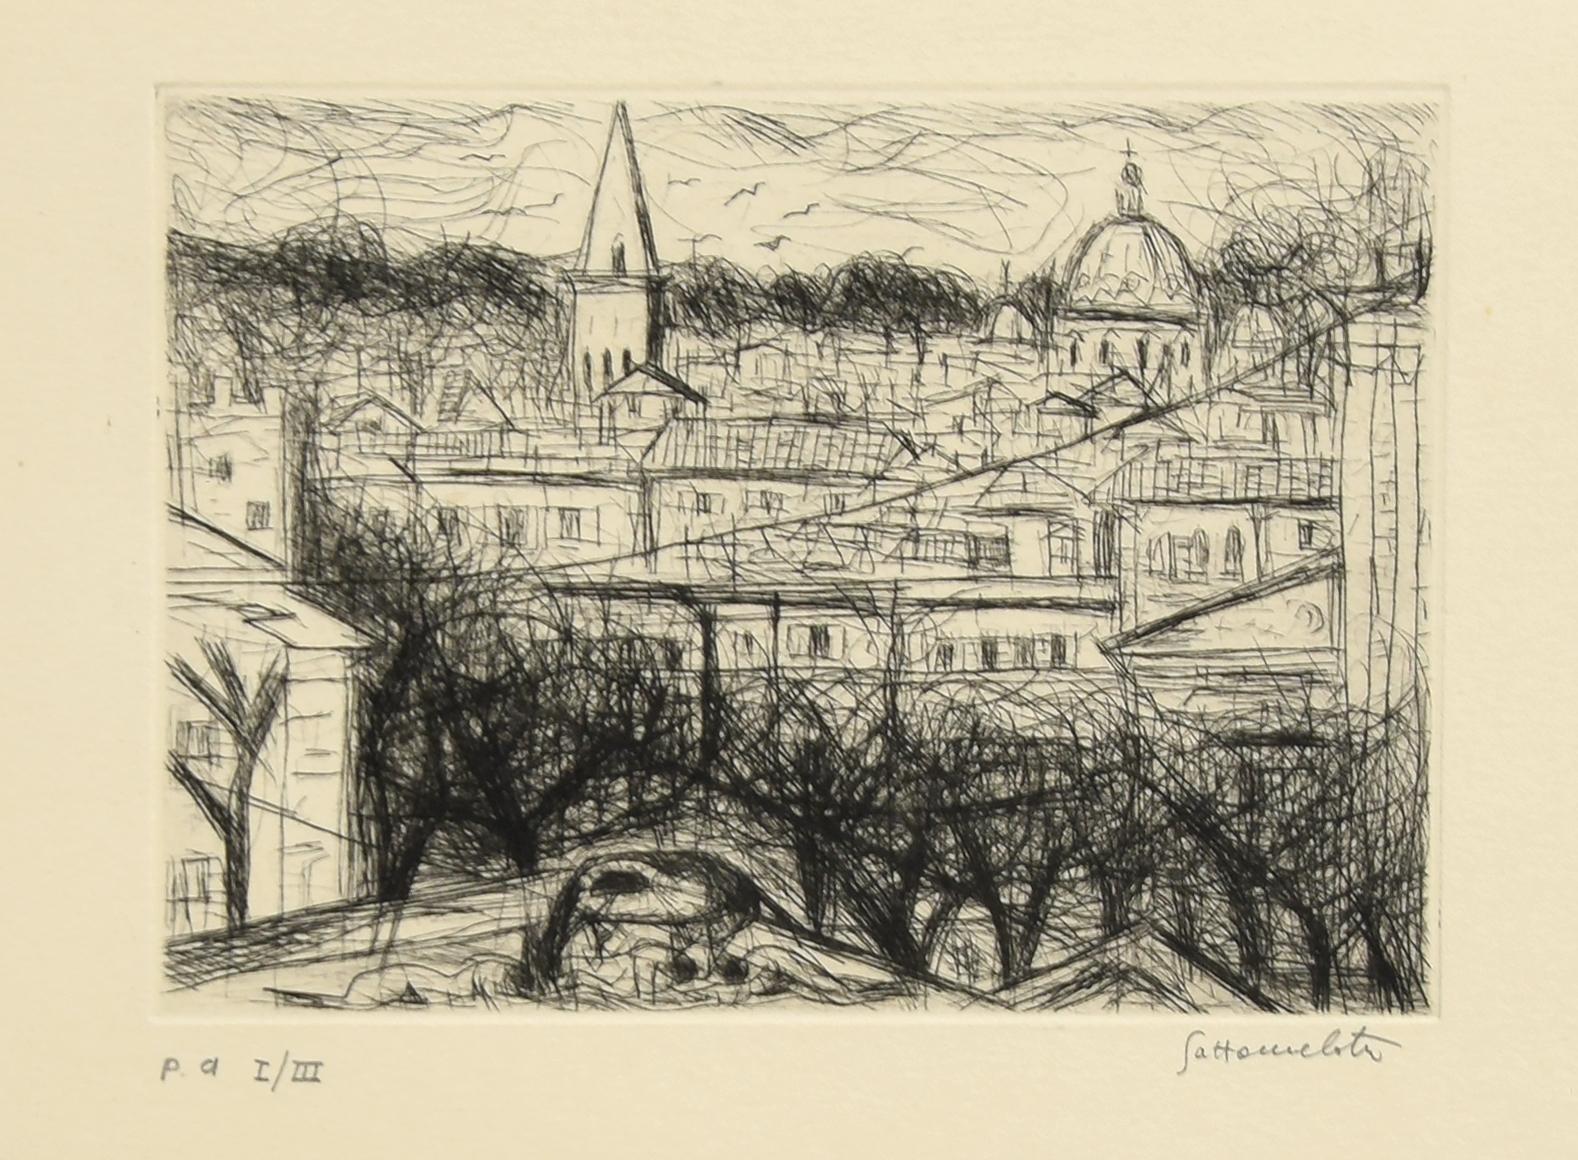 City View - Etching by N. Gattamelata - Late 20th Century